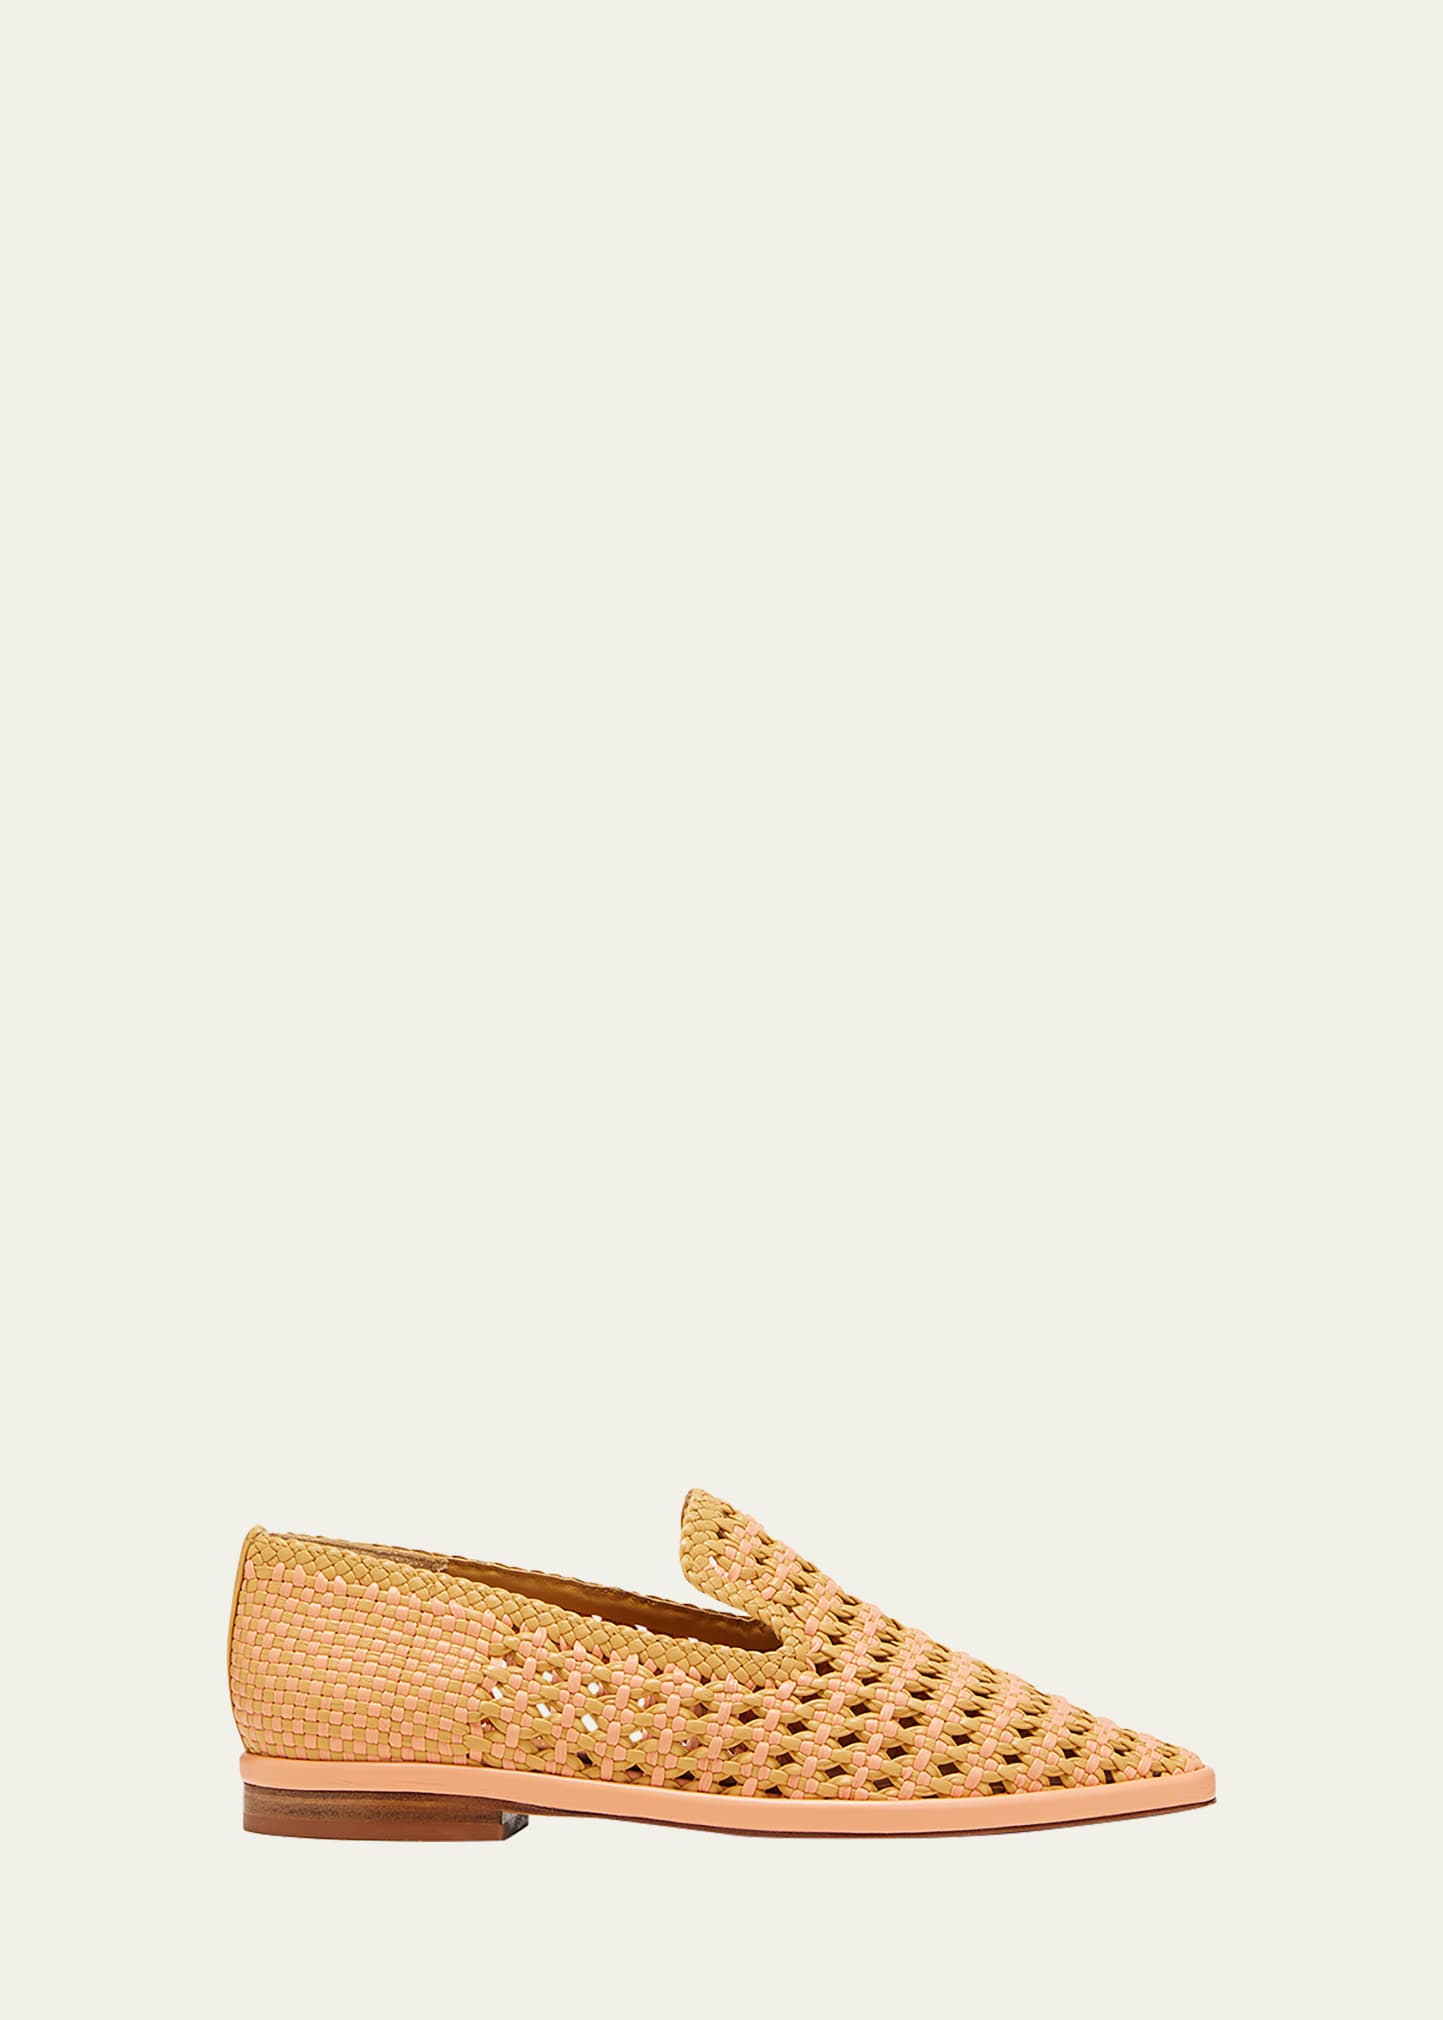 Clergerie Paris Omen Braided Leather Slip-On Loafers